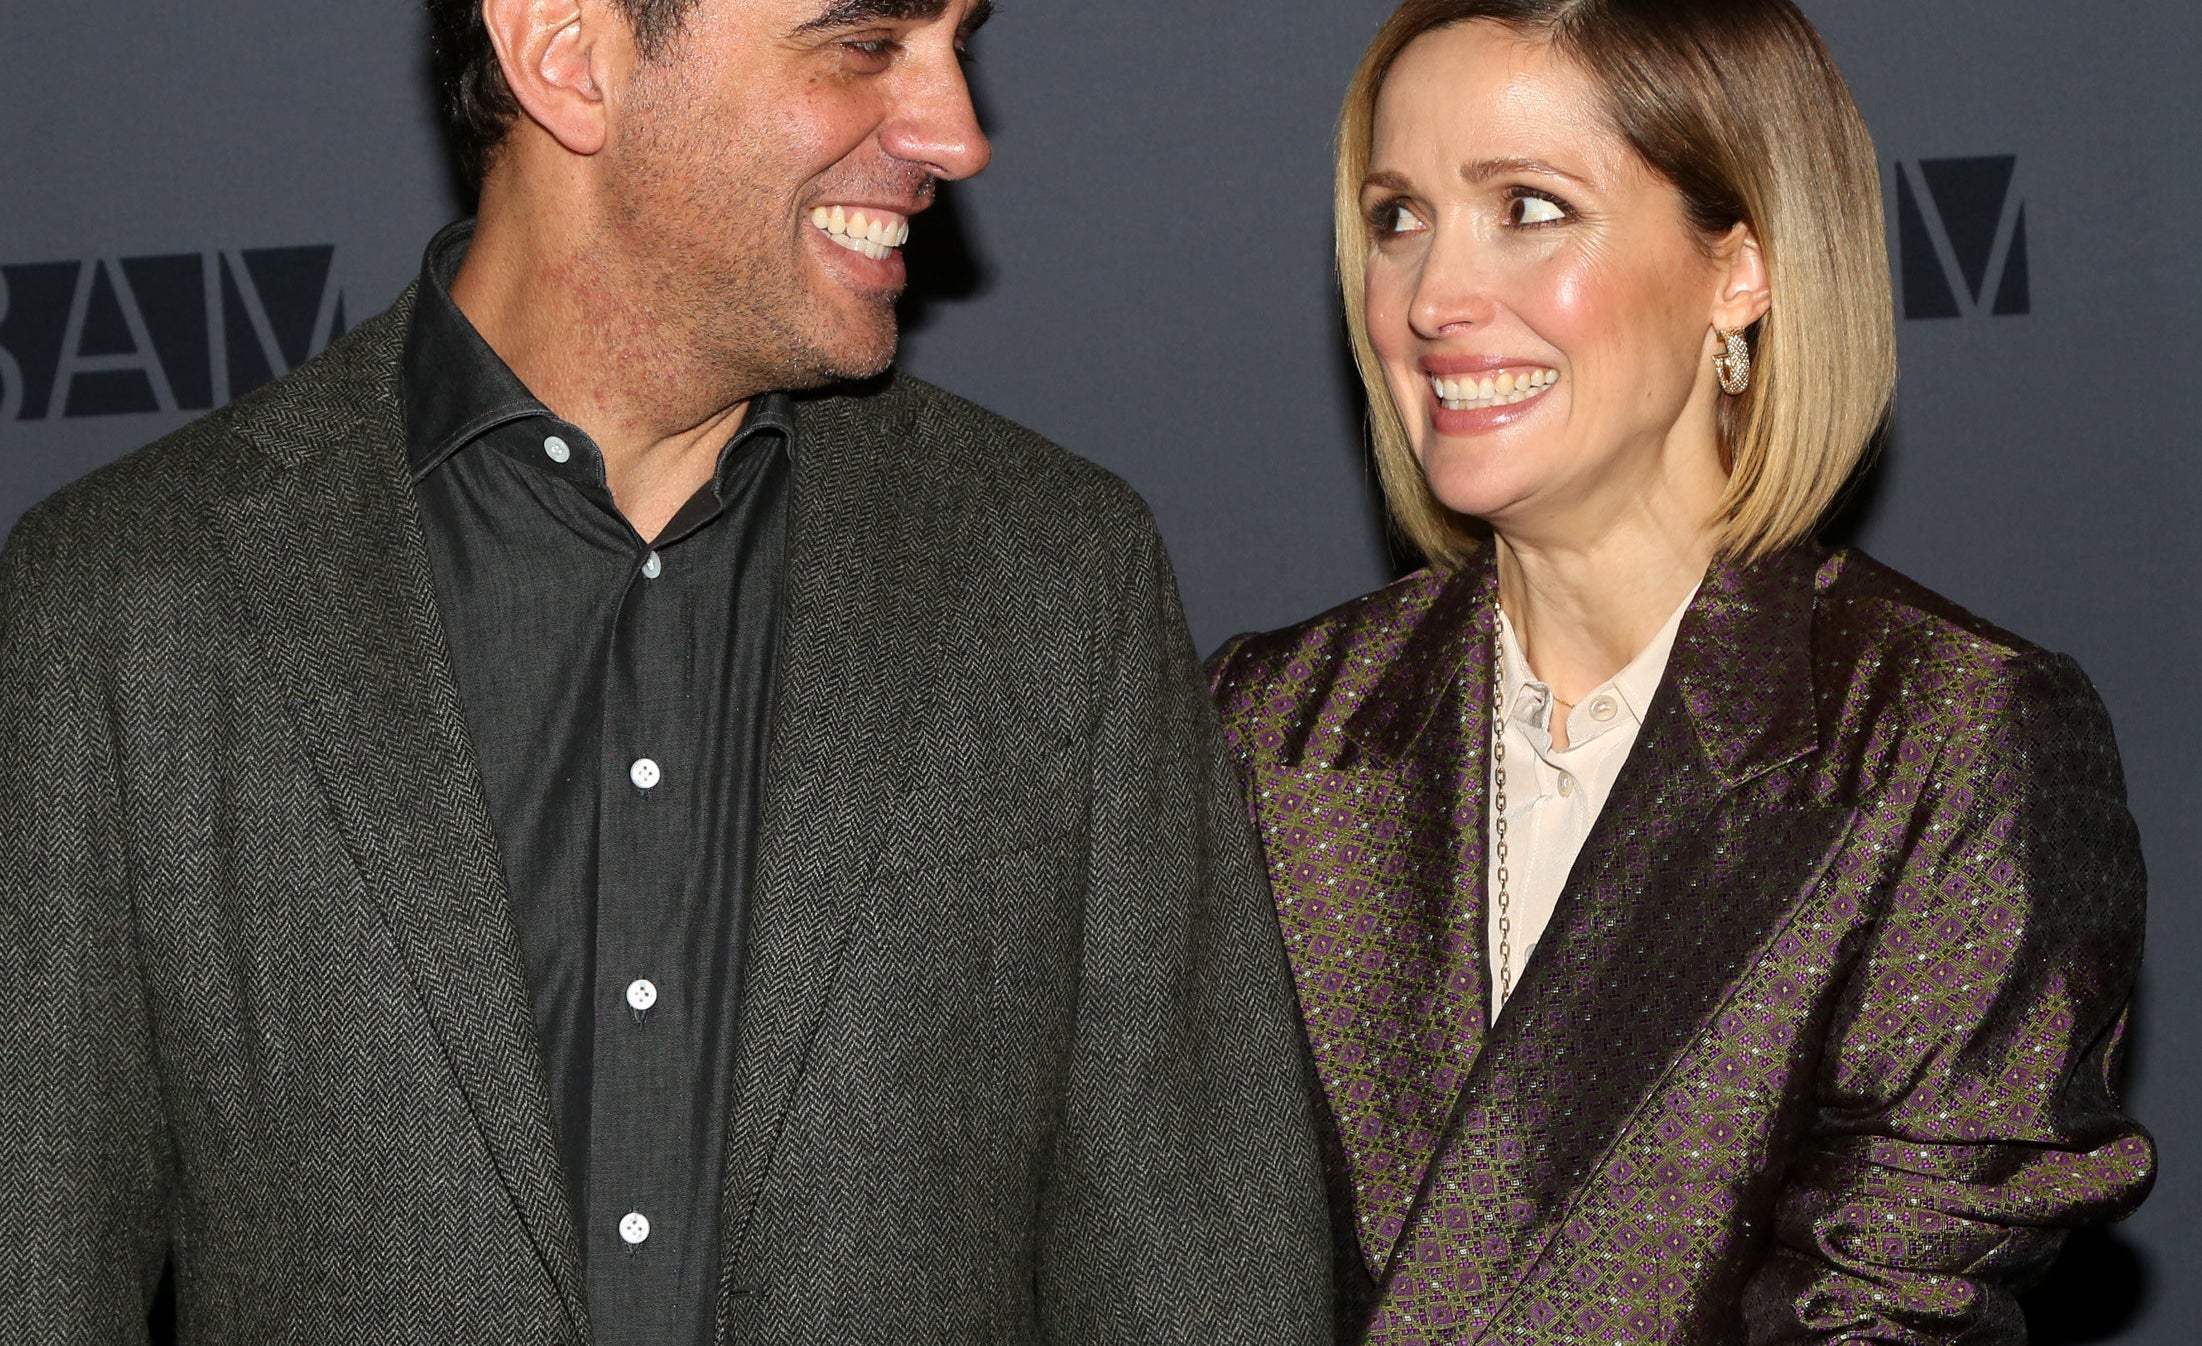 Bobby Canavale and Rose Byrne smiling at each other